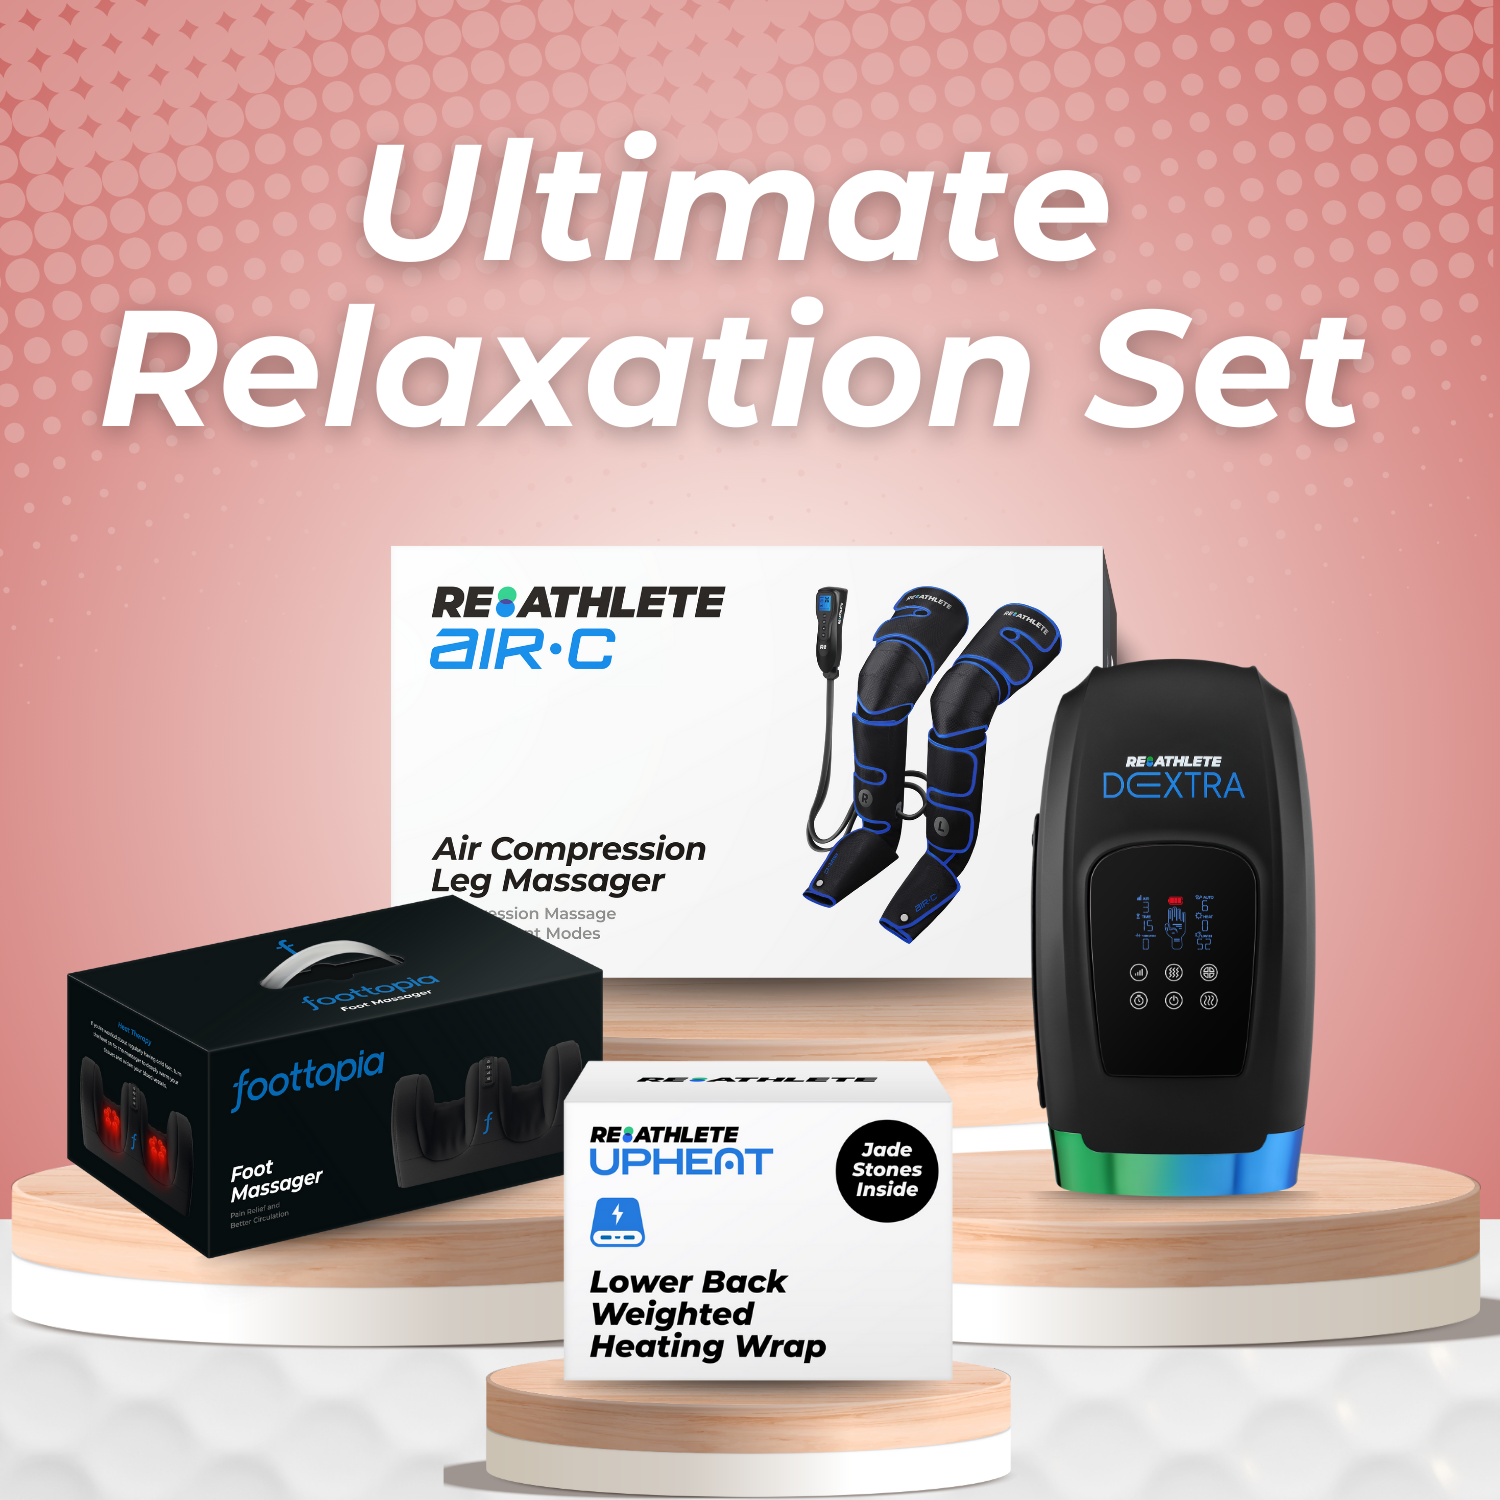 Ultimate Relaxation Set